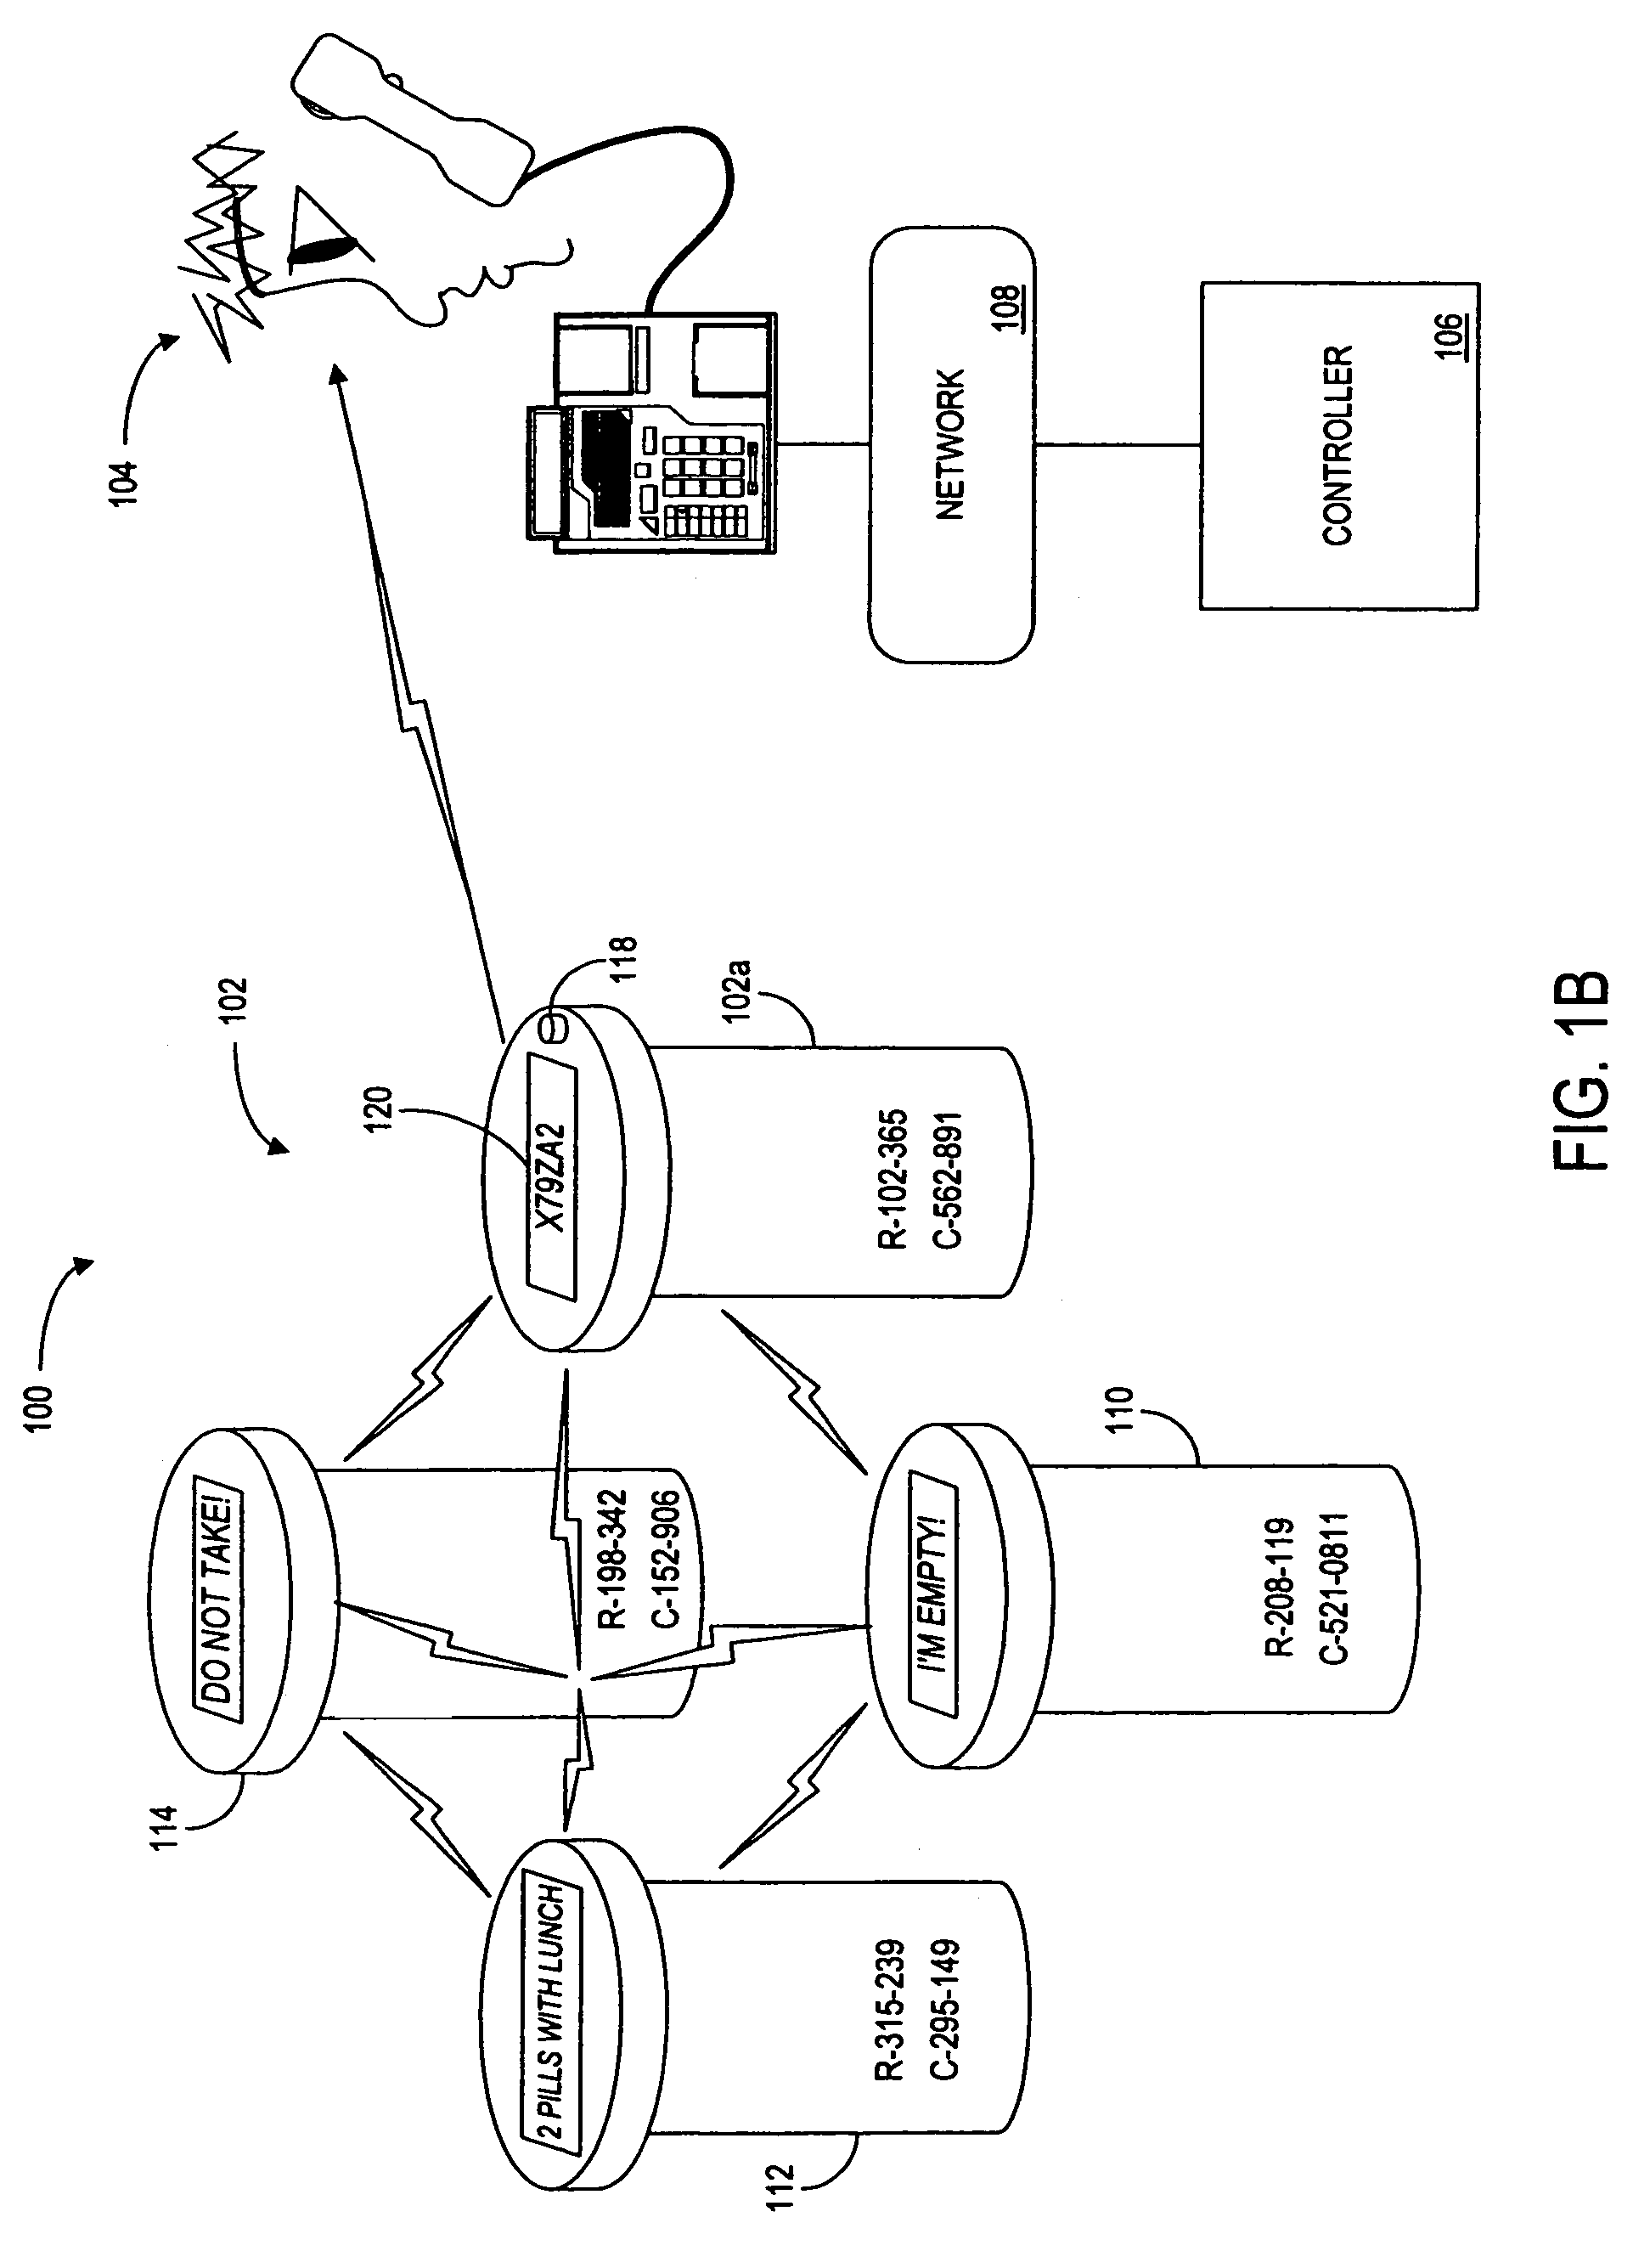 Methods and apparatus for increasing, monitoring and/or rewarding a party's compliance with a schedule for taking medicines